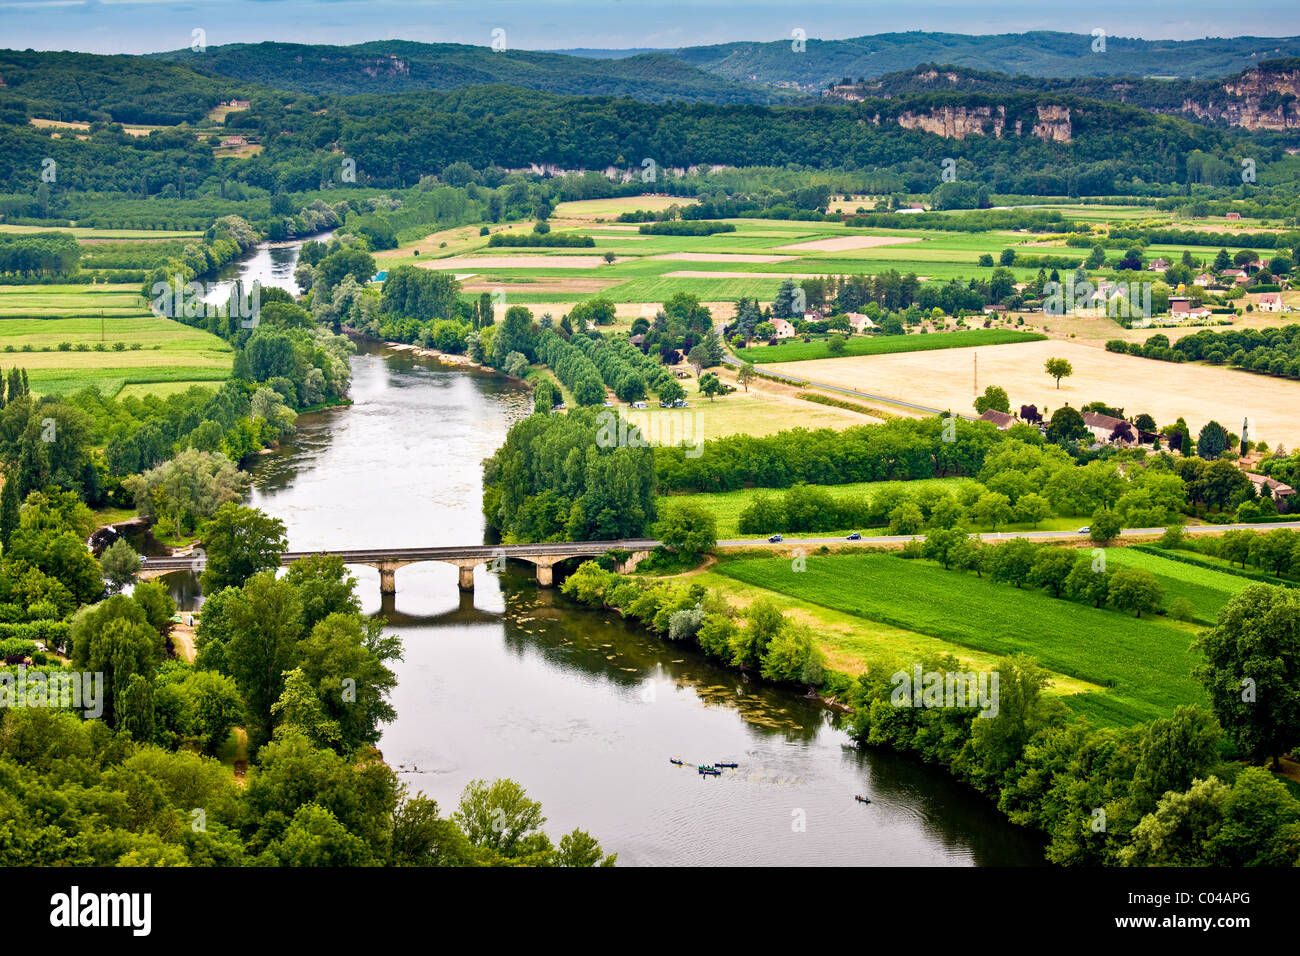 Picturesque scene of the River Dordogne viewed from on high at Domme, Dordogne, France Stock Photo